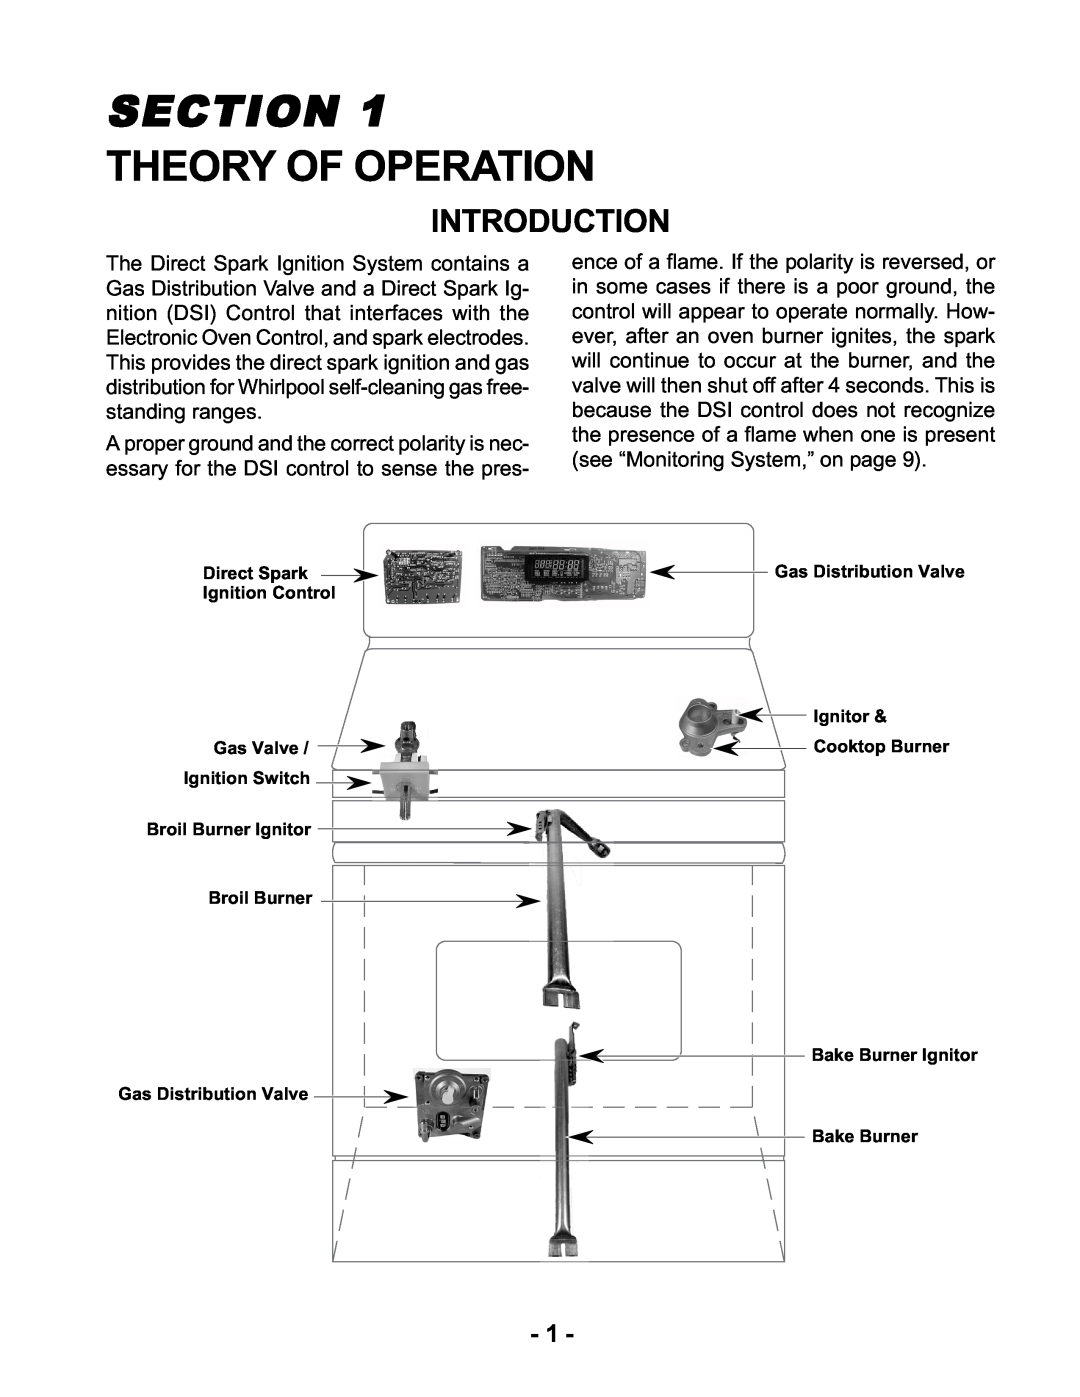 Whirlpool KR-28 manual Section, Theory Of Operation, Introduction 